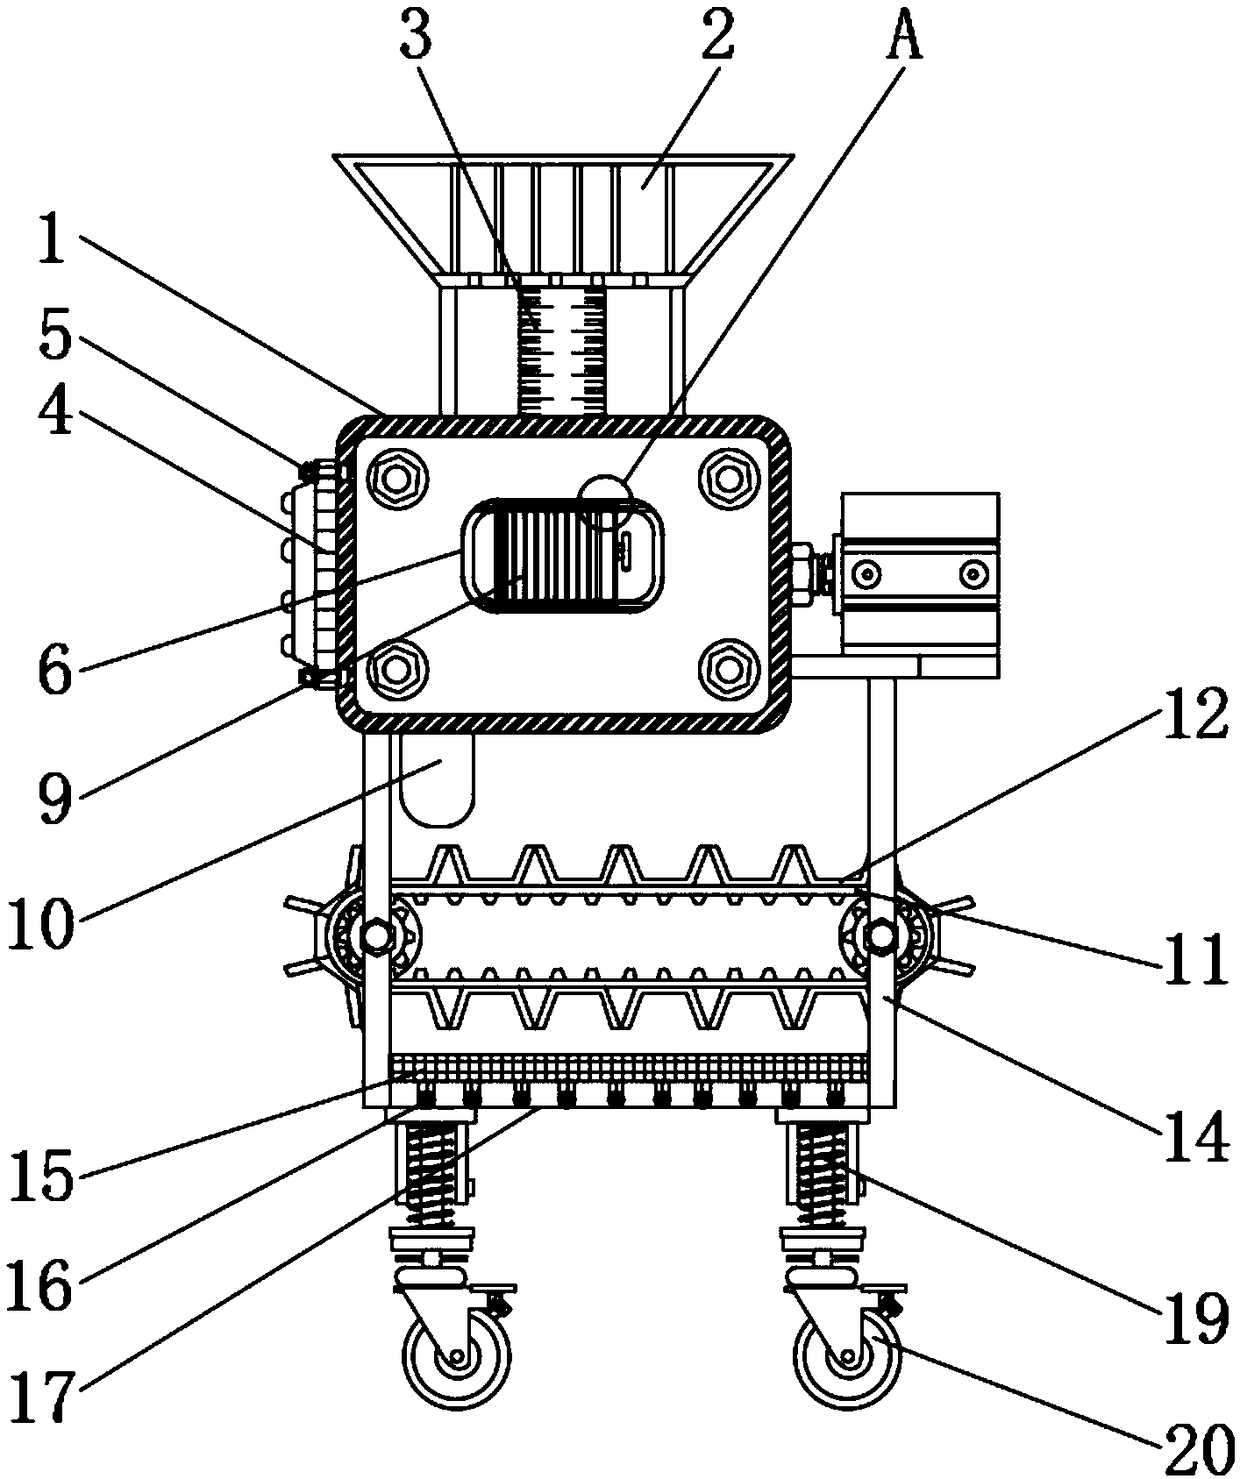 Puffing device with drying function for potato chip processing